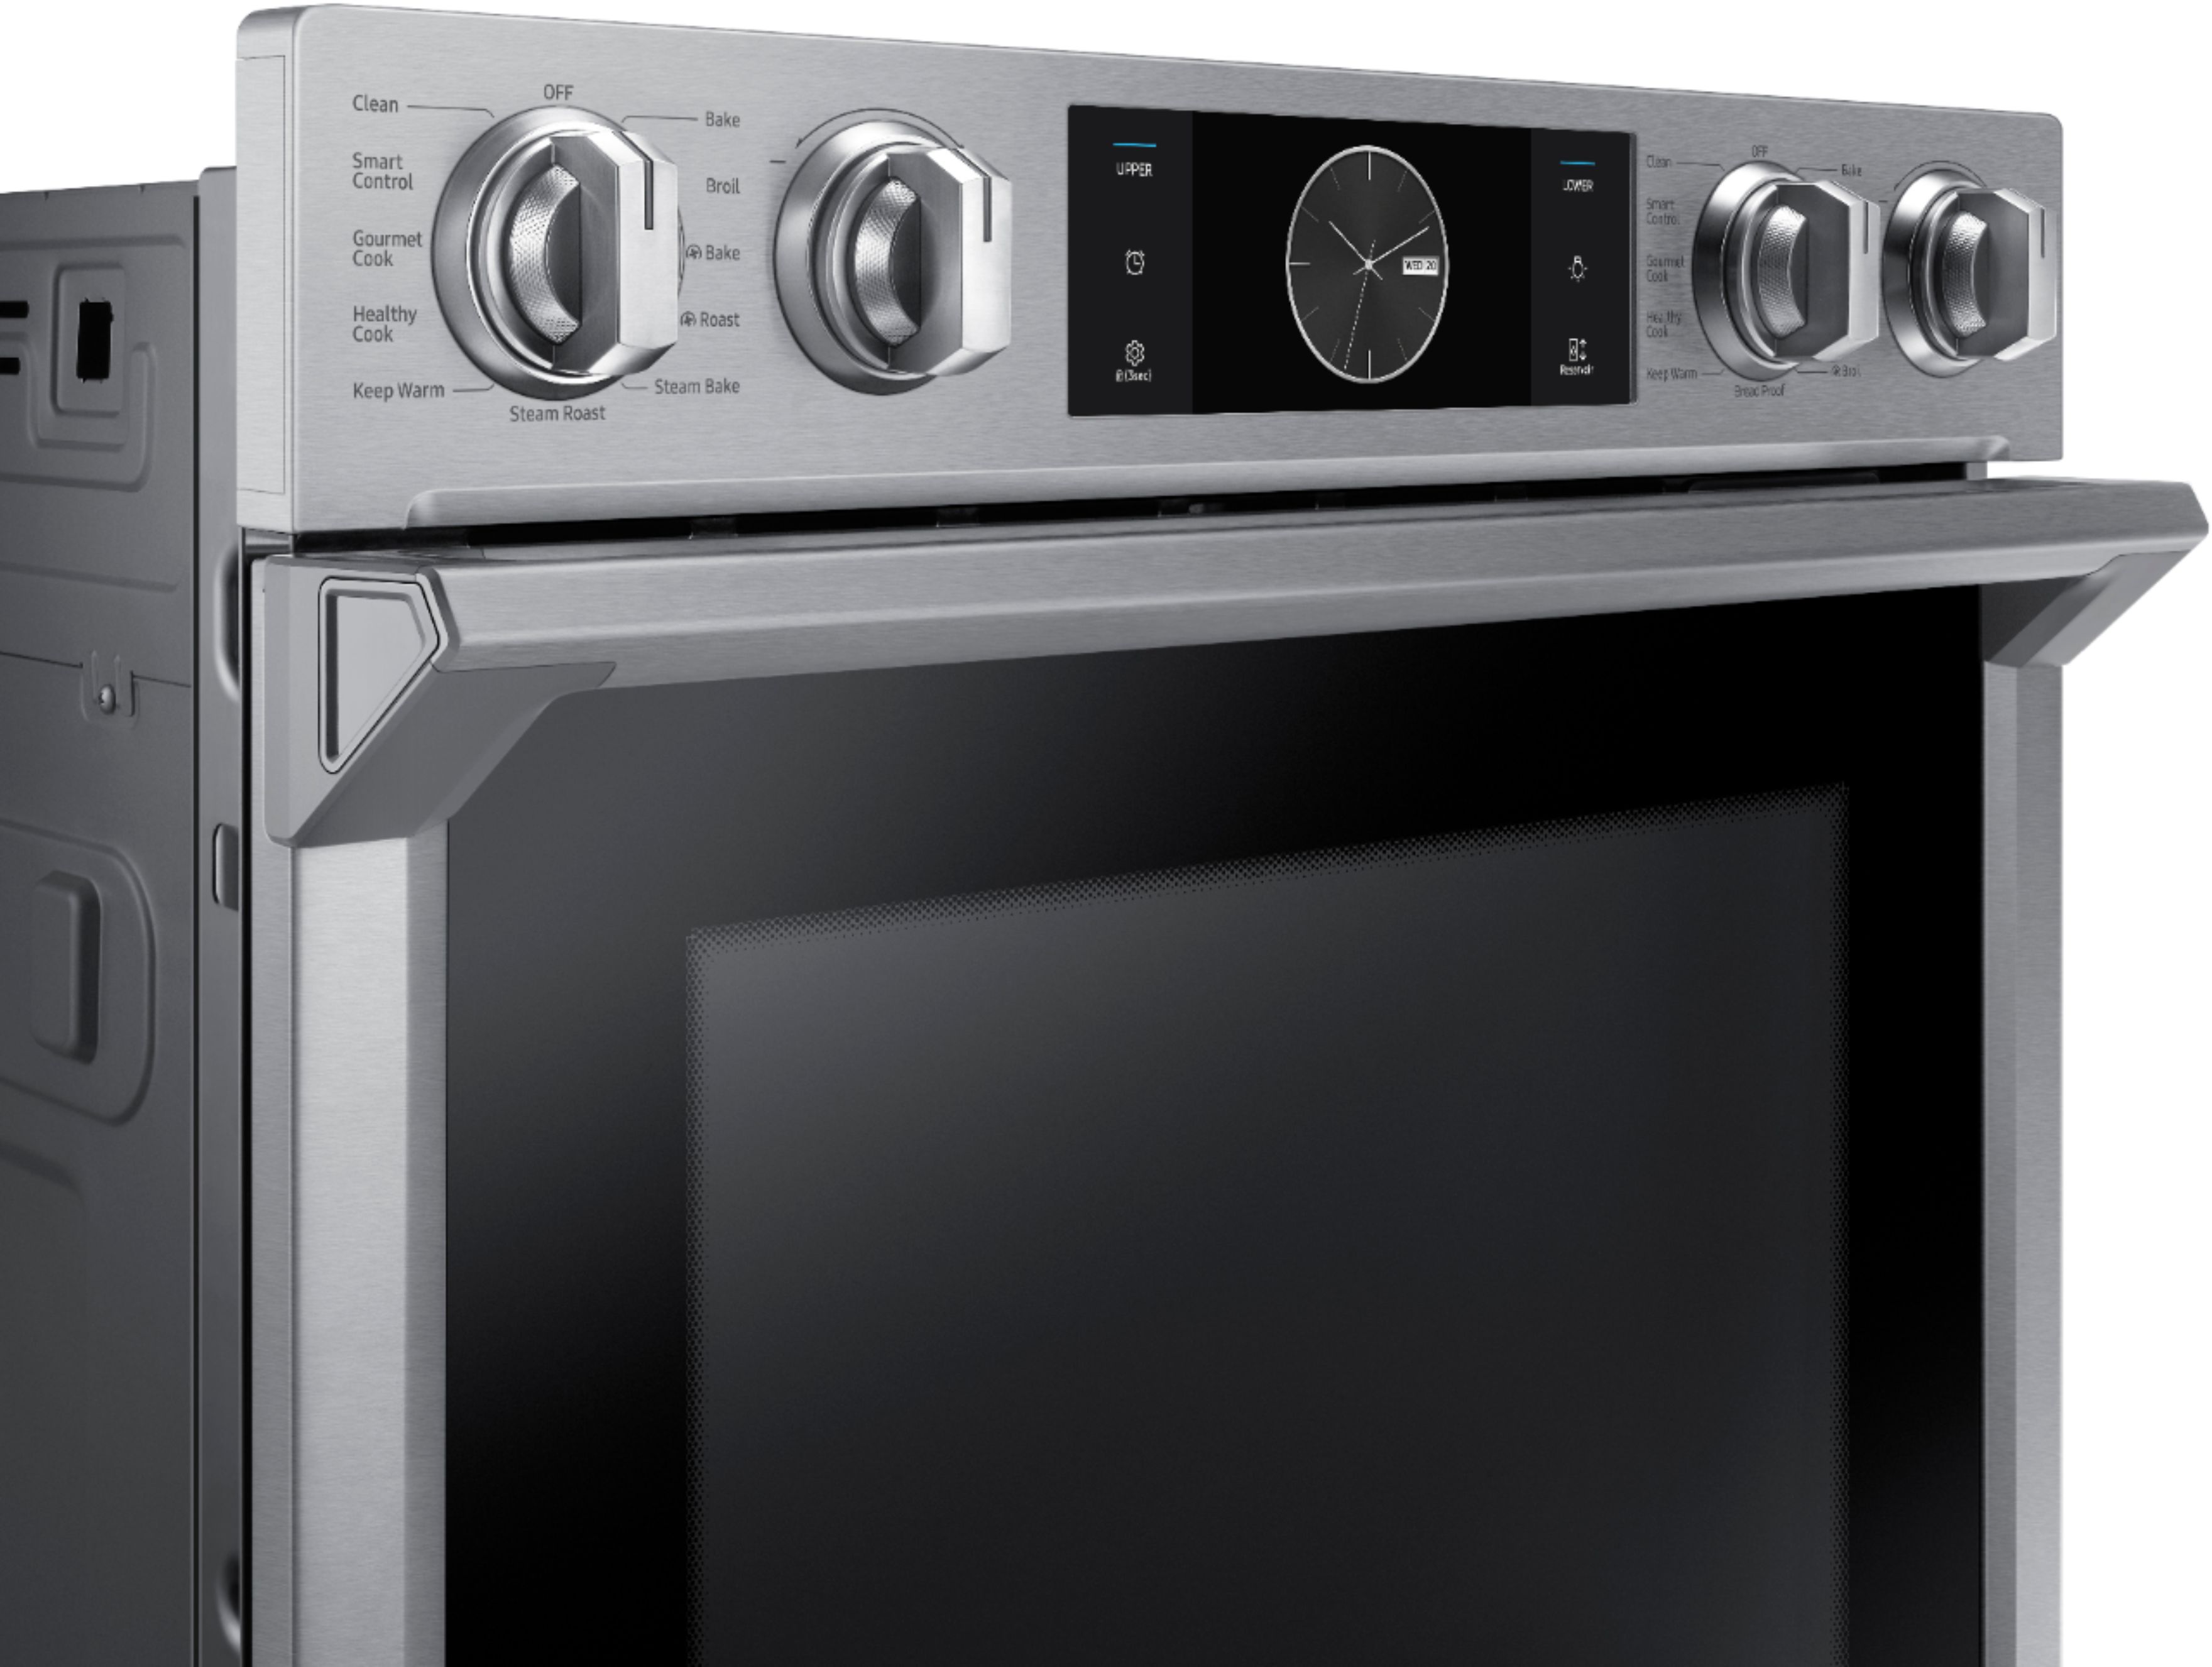 NV51K7770DS Samsung 30 Double Wall Oven with Flex Duo - Stainless Steel